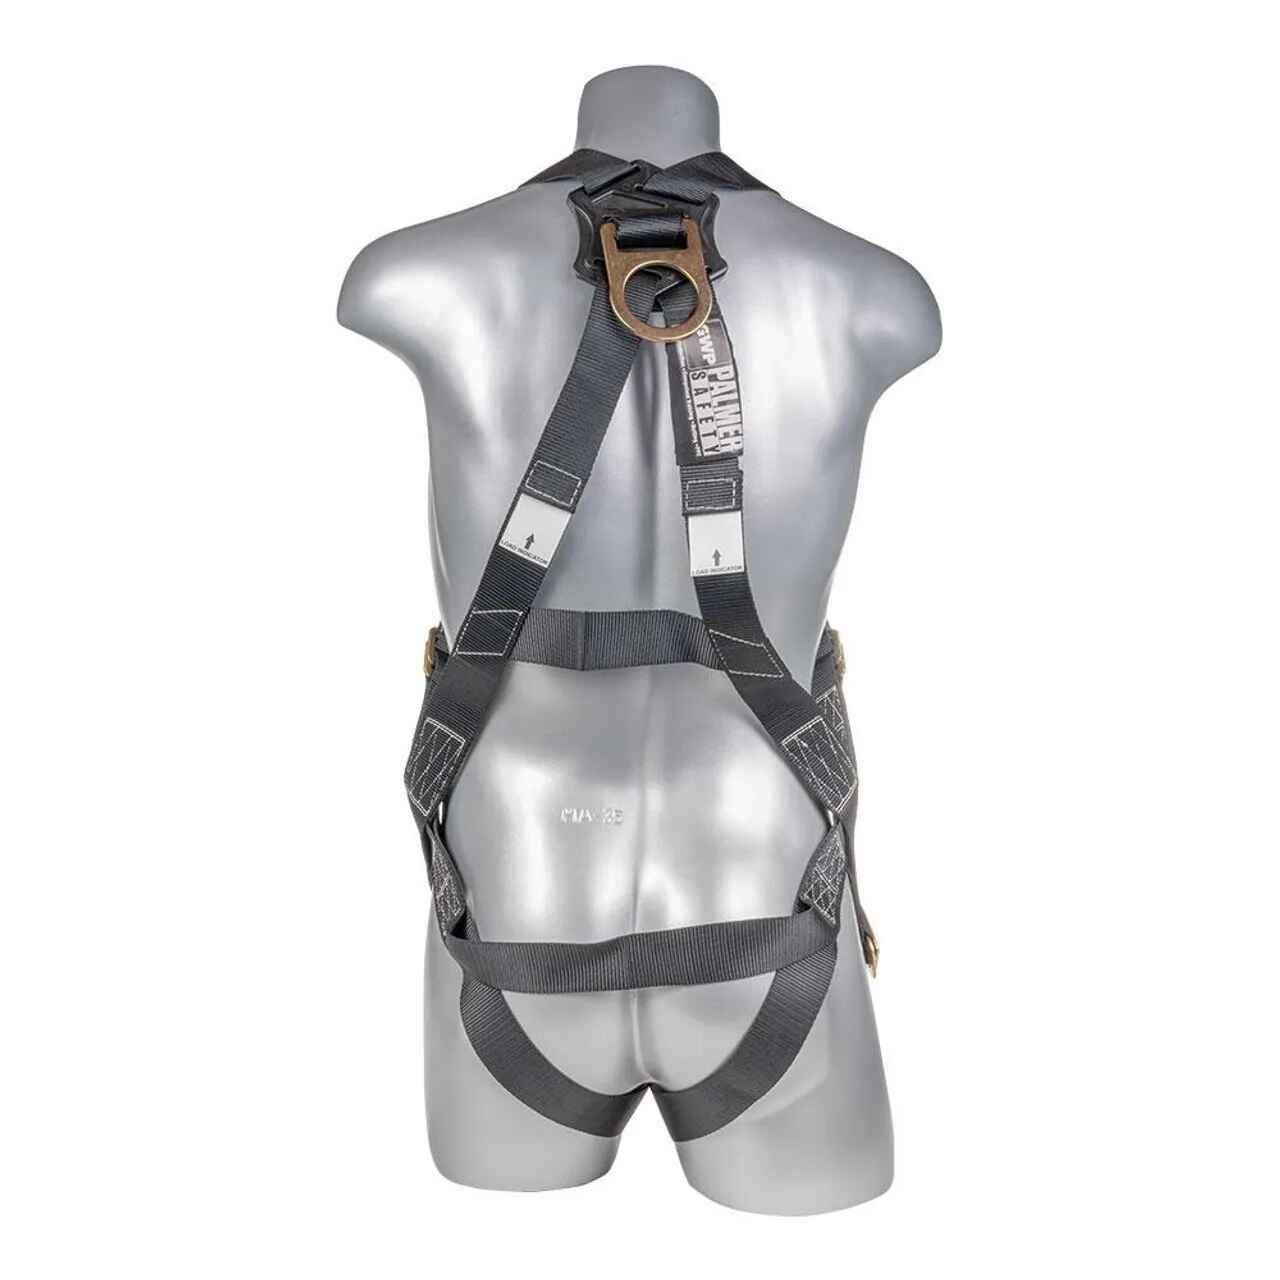 Construction Safety Harness 5 Point, Pass-Thru Legs, Back D-Ring - Defender Safety